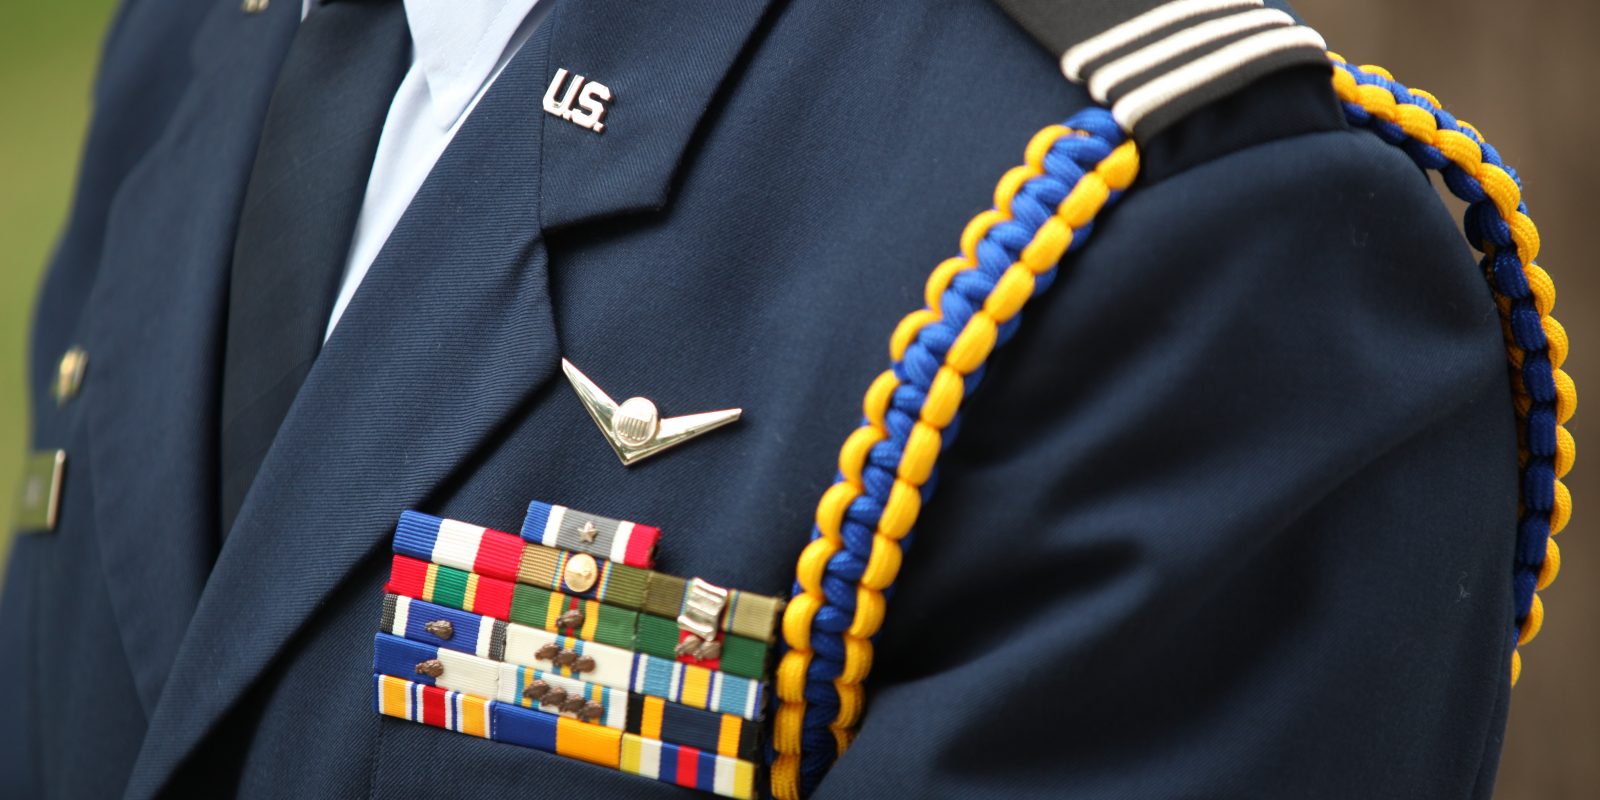 A detail photo of an armed service member's uniform.